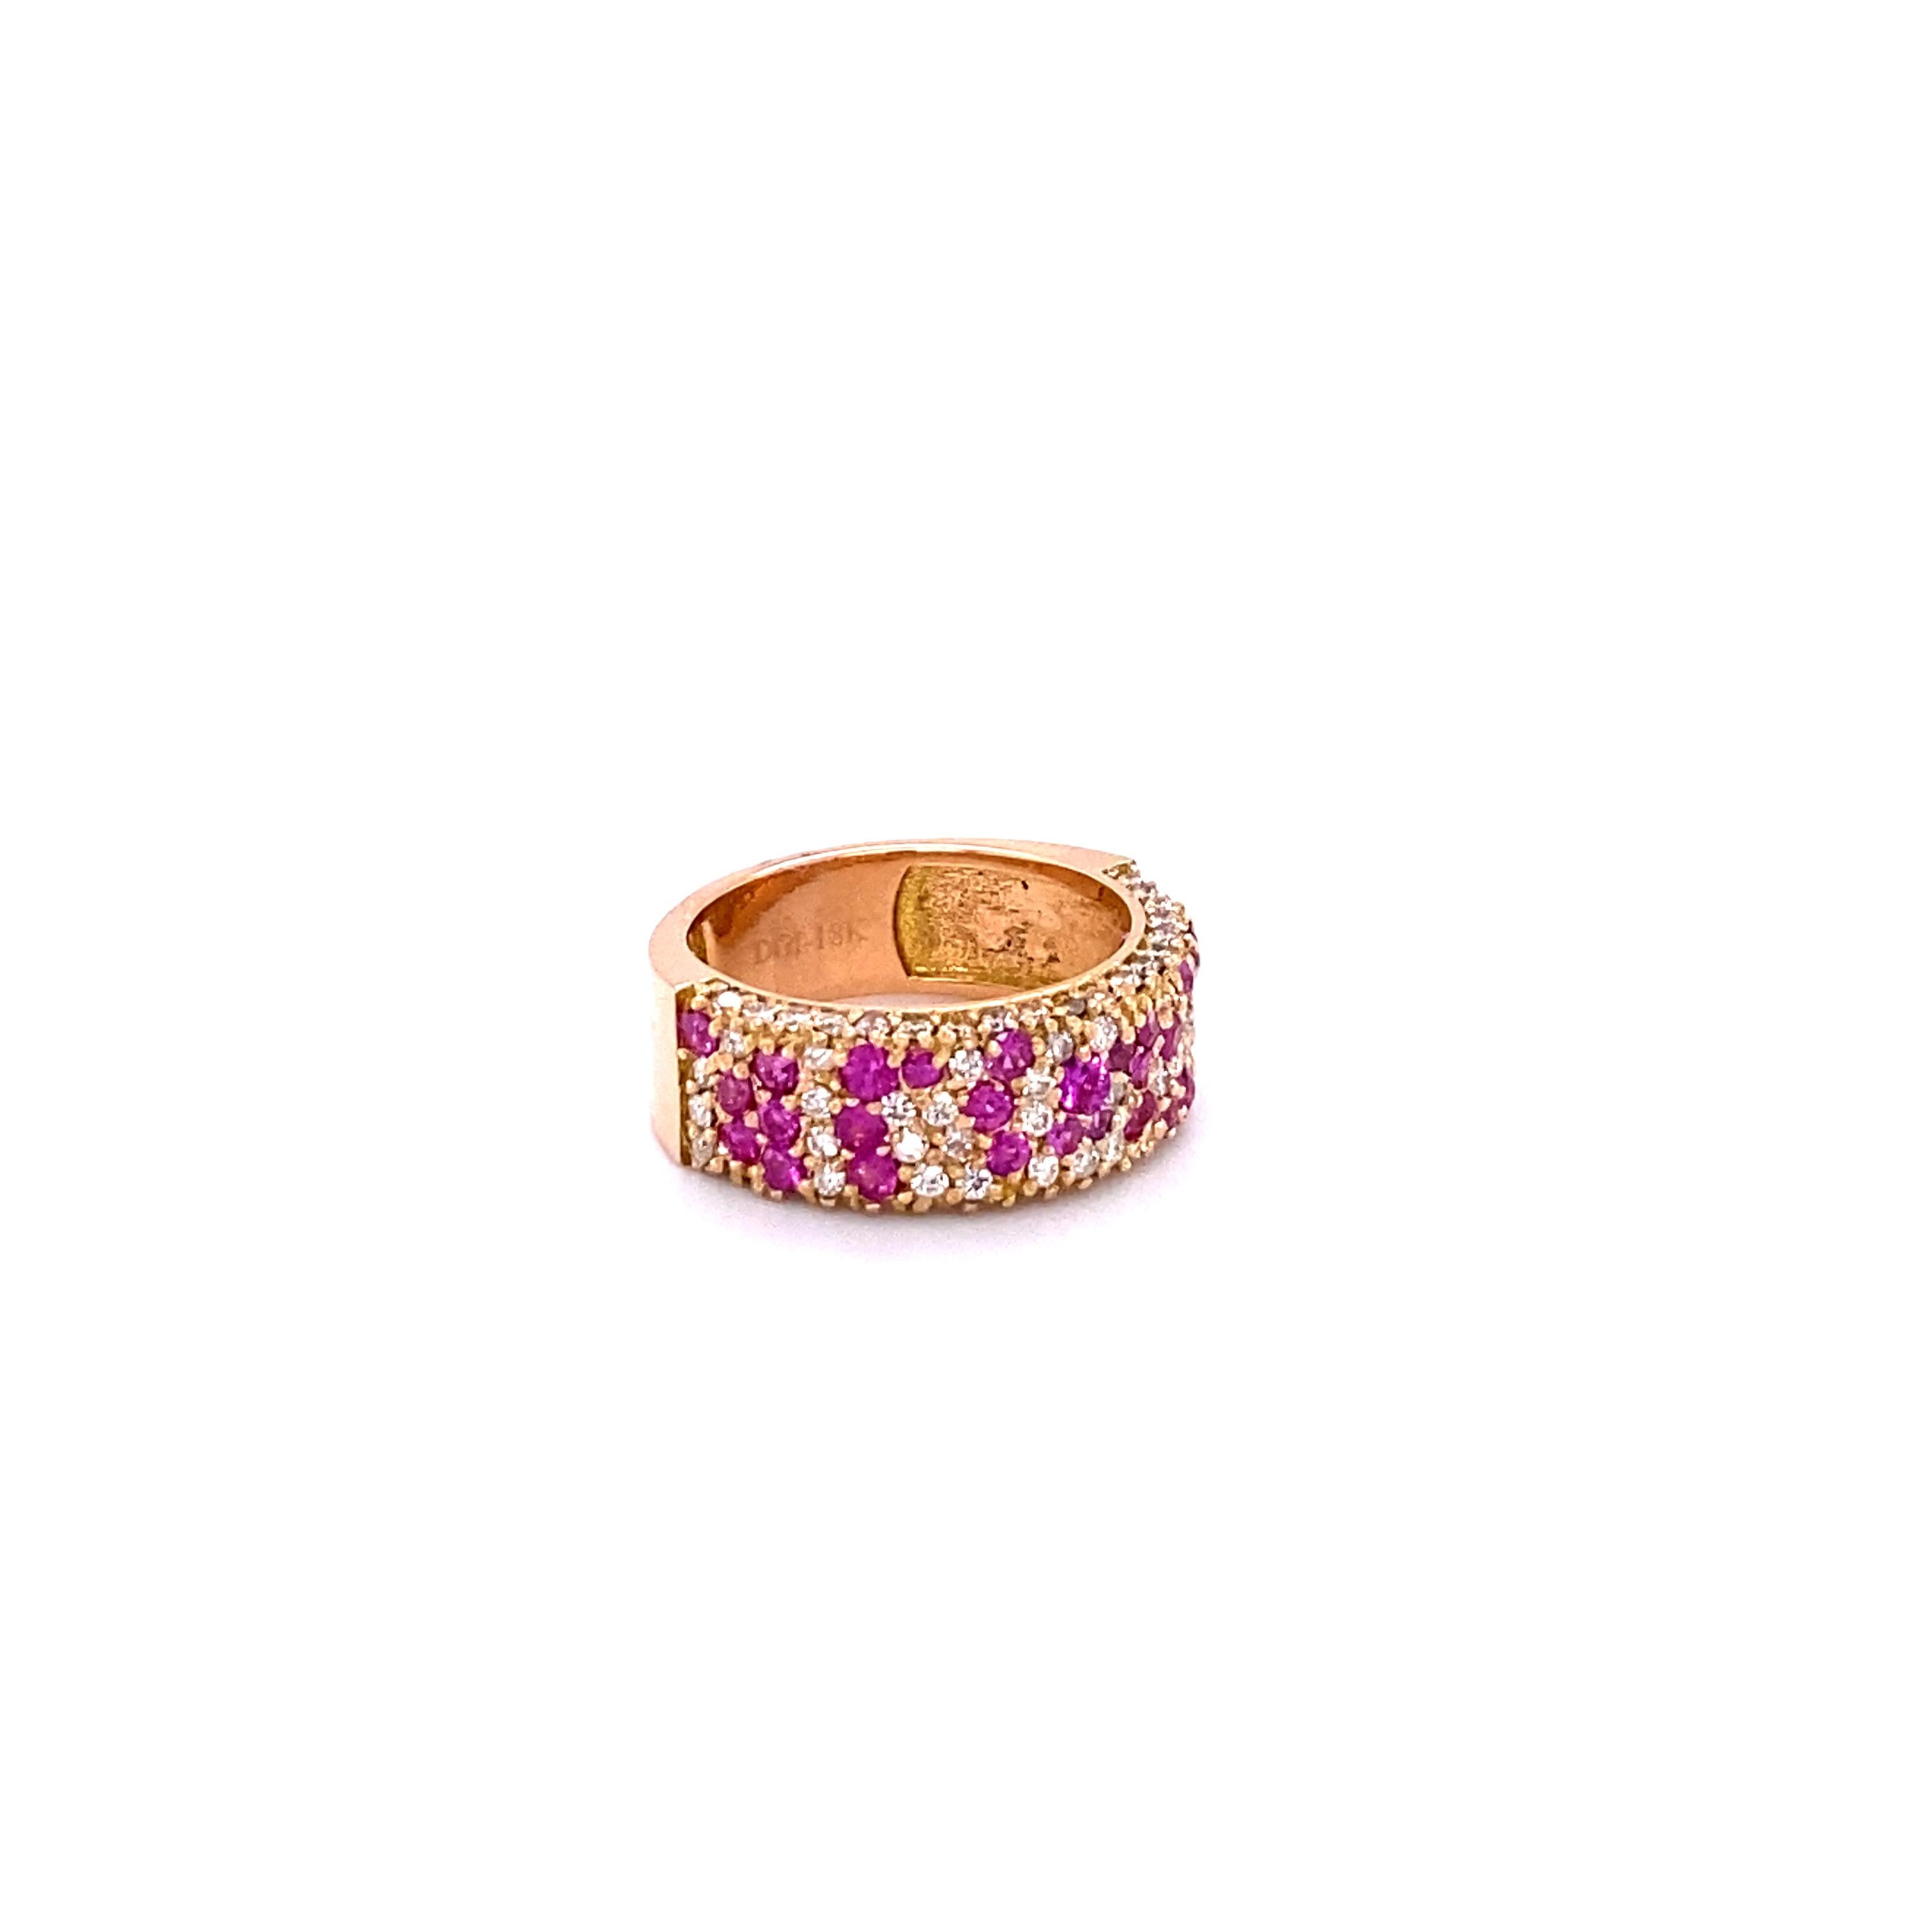 2.10 Carat Sapphire Diamond 18 Karat Rose Gold Band

This unique band has a cluster of 35 Pink Sapphires that weighs 1.23 Carats and 75 Round Cut Diamonds that weigh 0.87 Carats.  The diamonds have a clarity of VS and color of H. The Total Carat